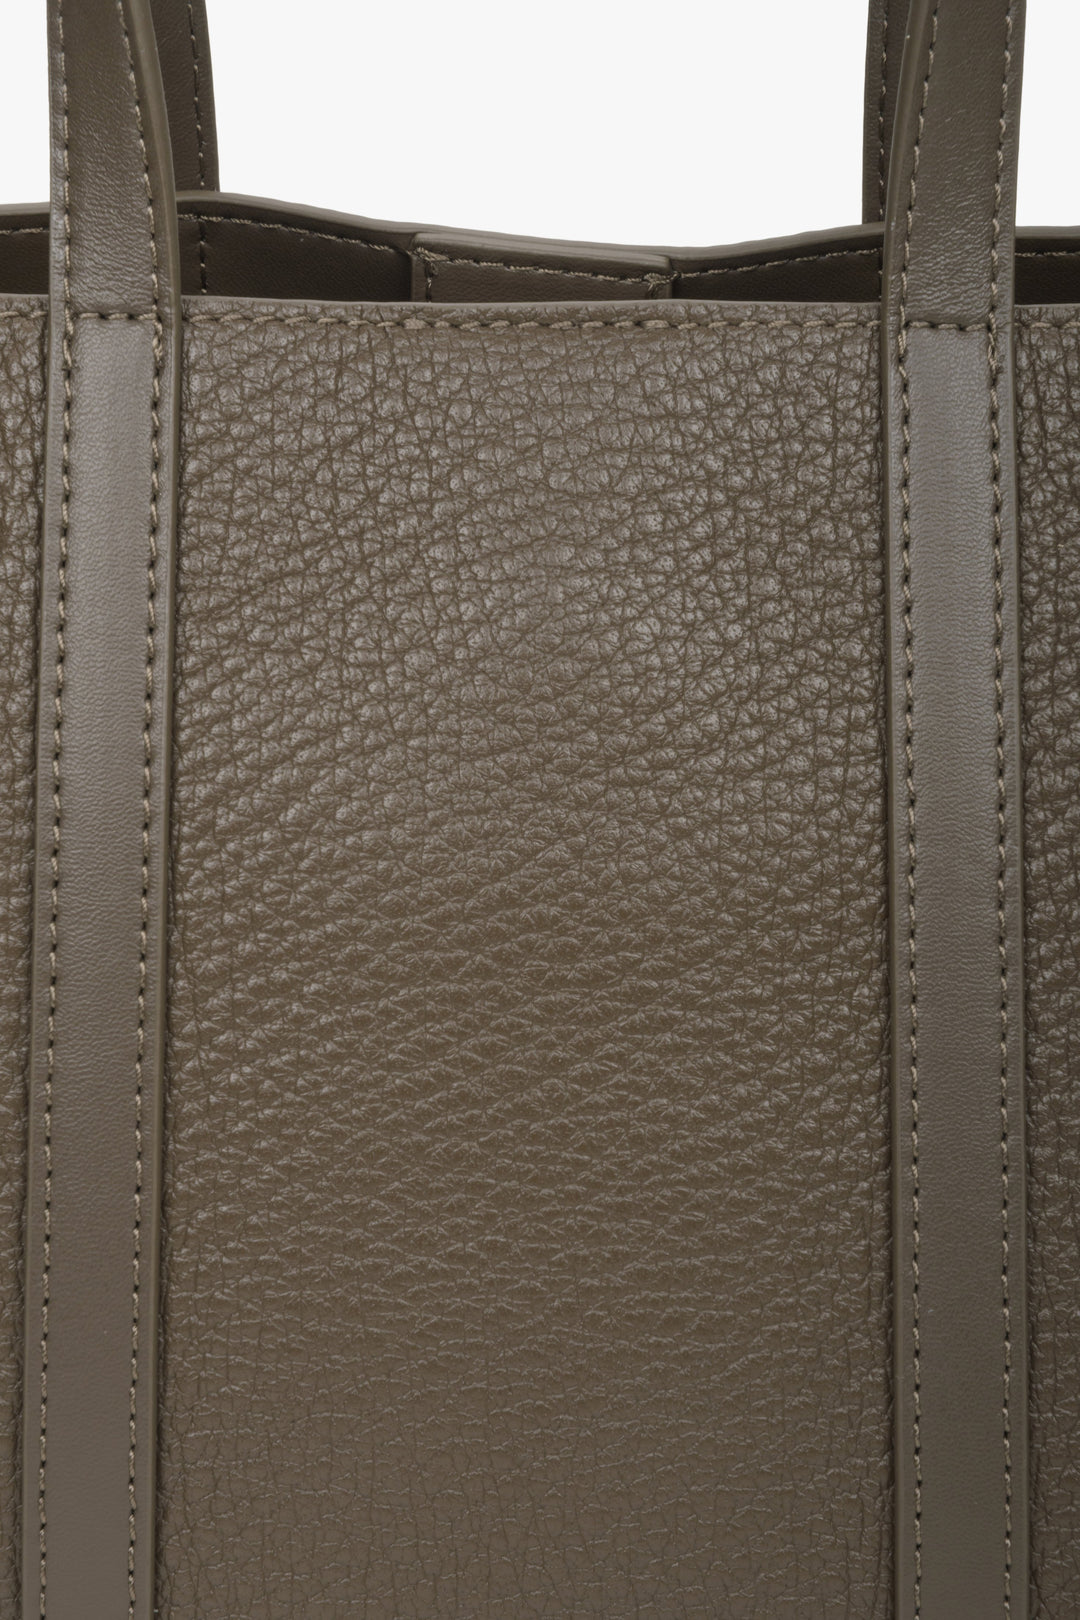 Women's brown leather shopper bag by Estro - close-up on the details.